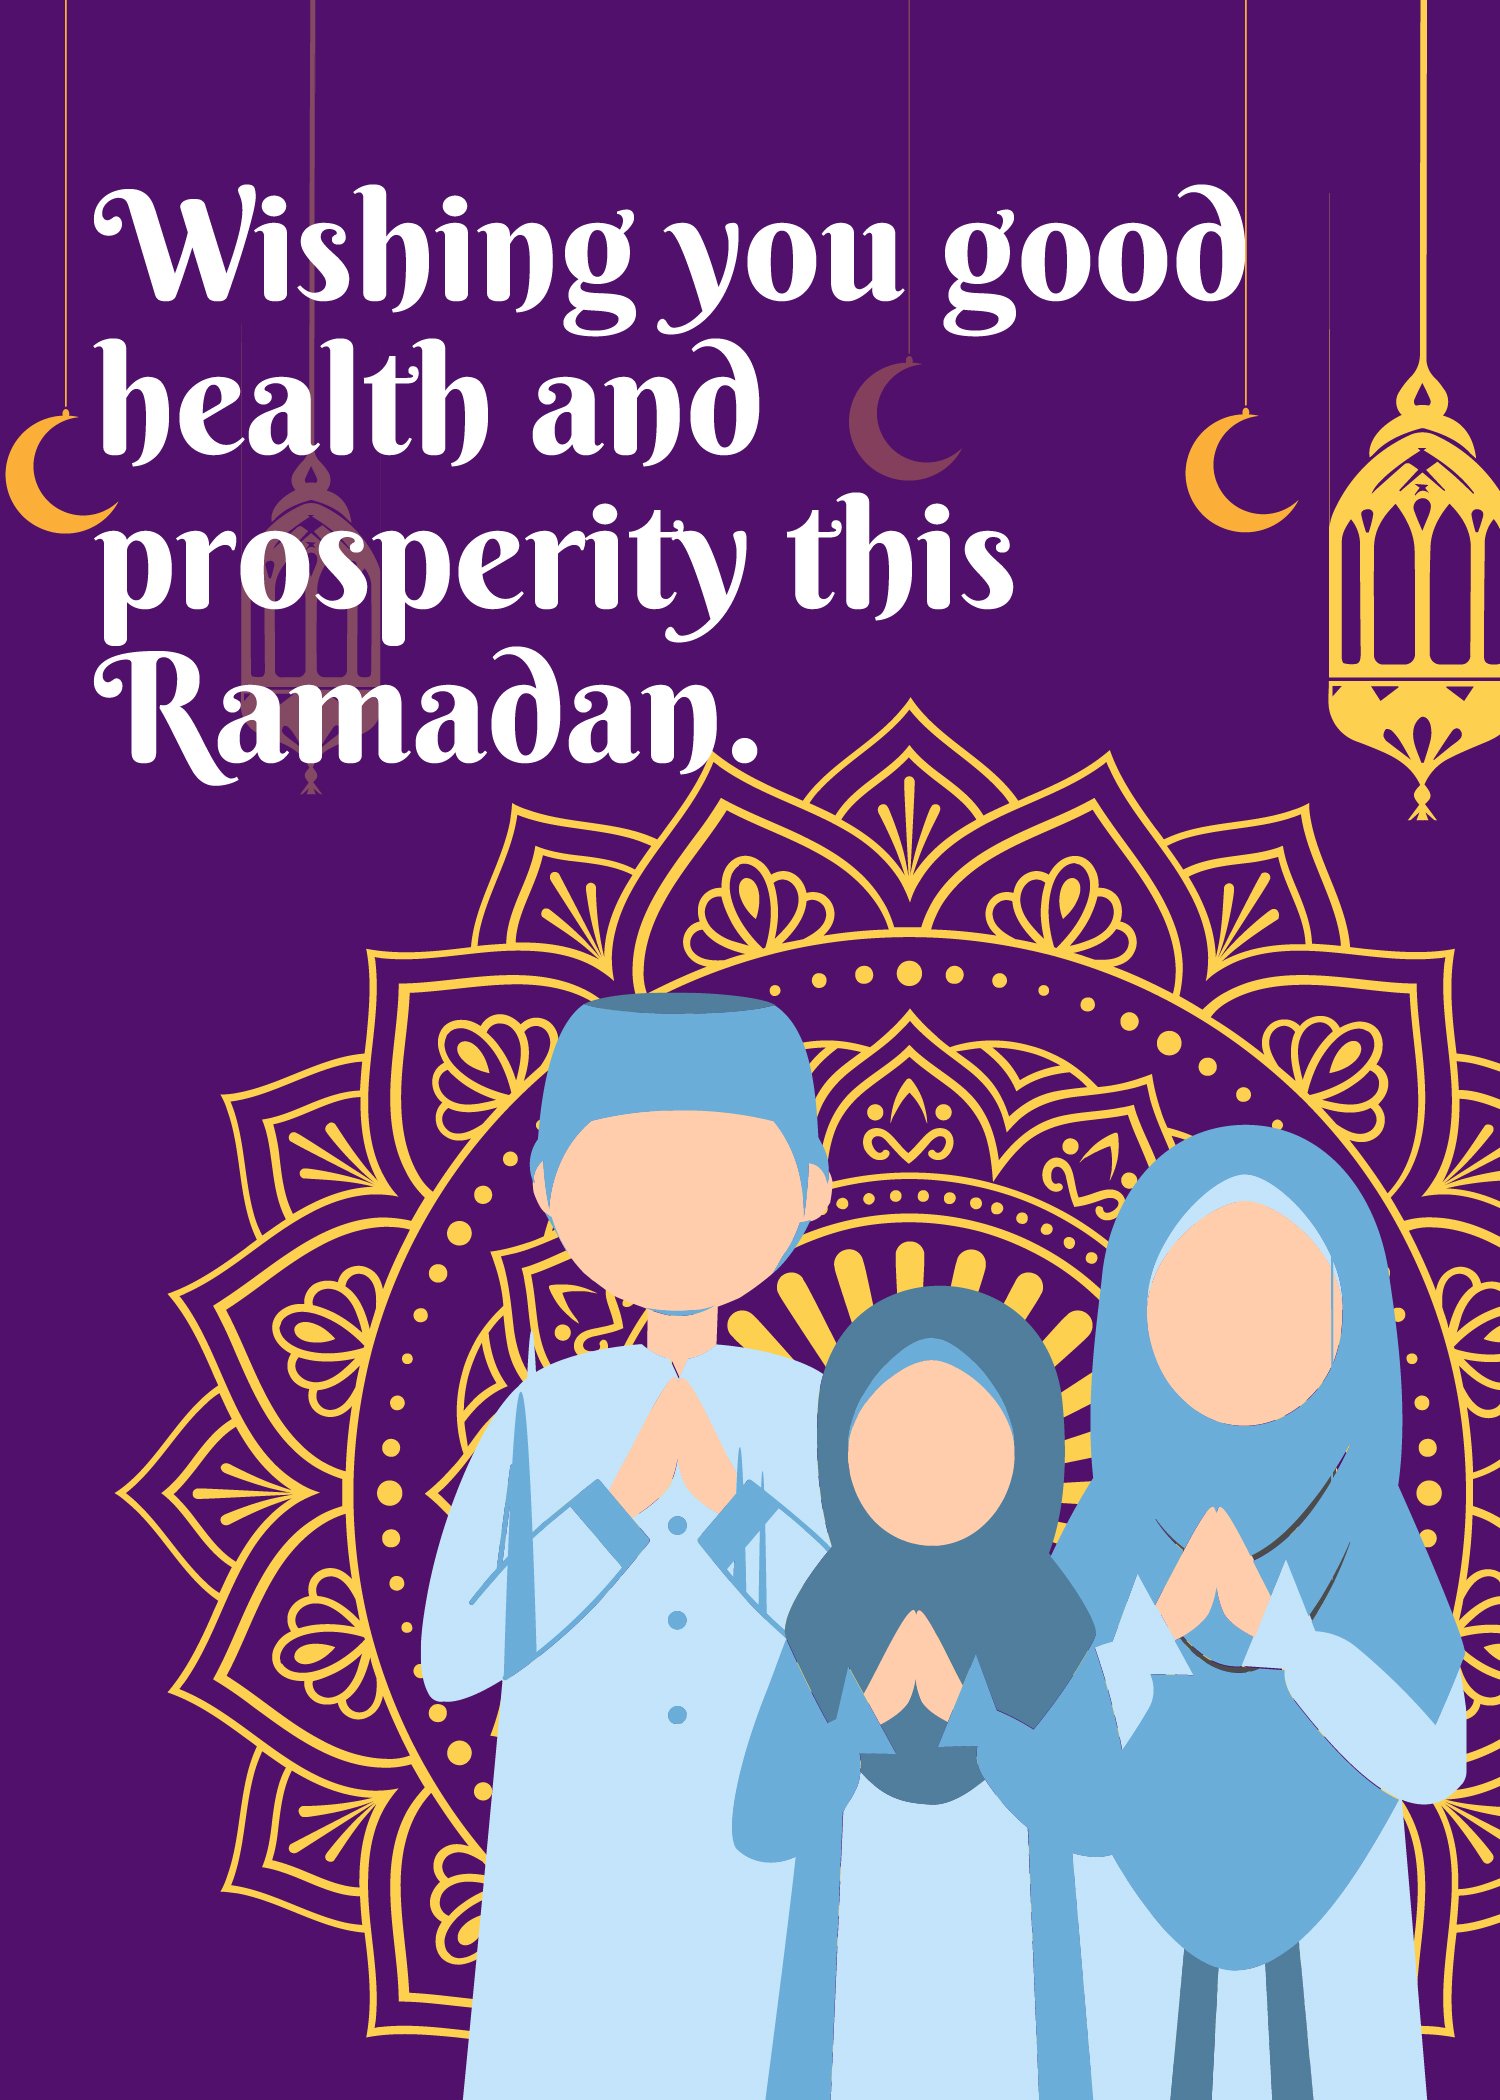 Free Ramadan Wishes in Word, Google Docs, Illustrator, PSD, Apple Pages, EPS, SVG, JPG, PNG